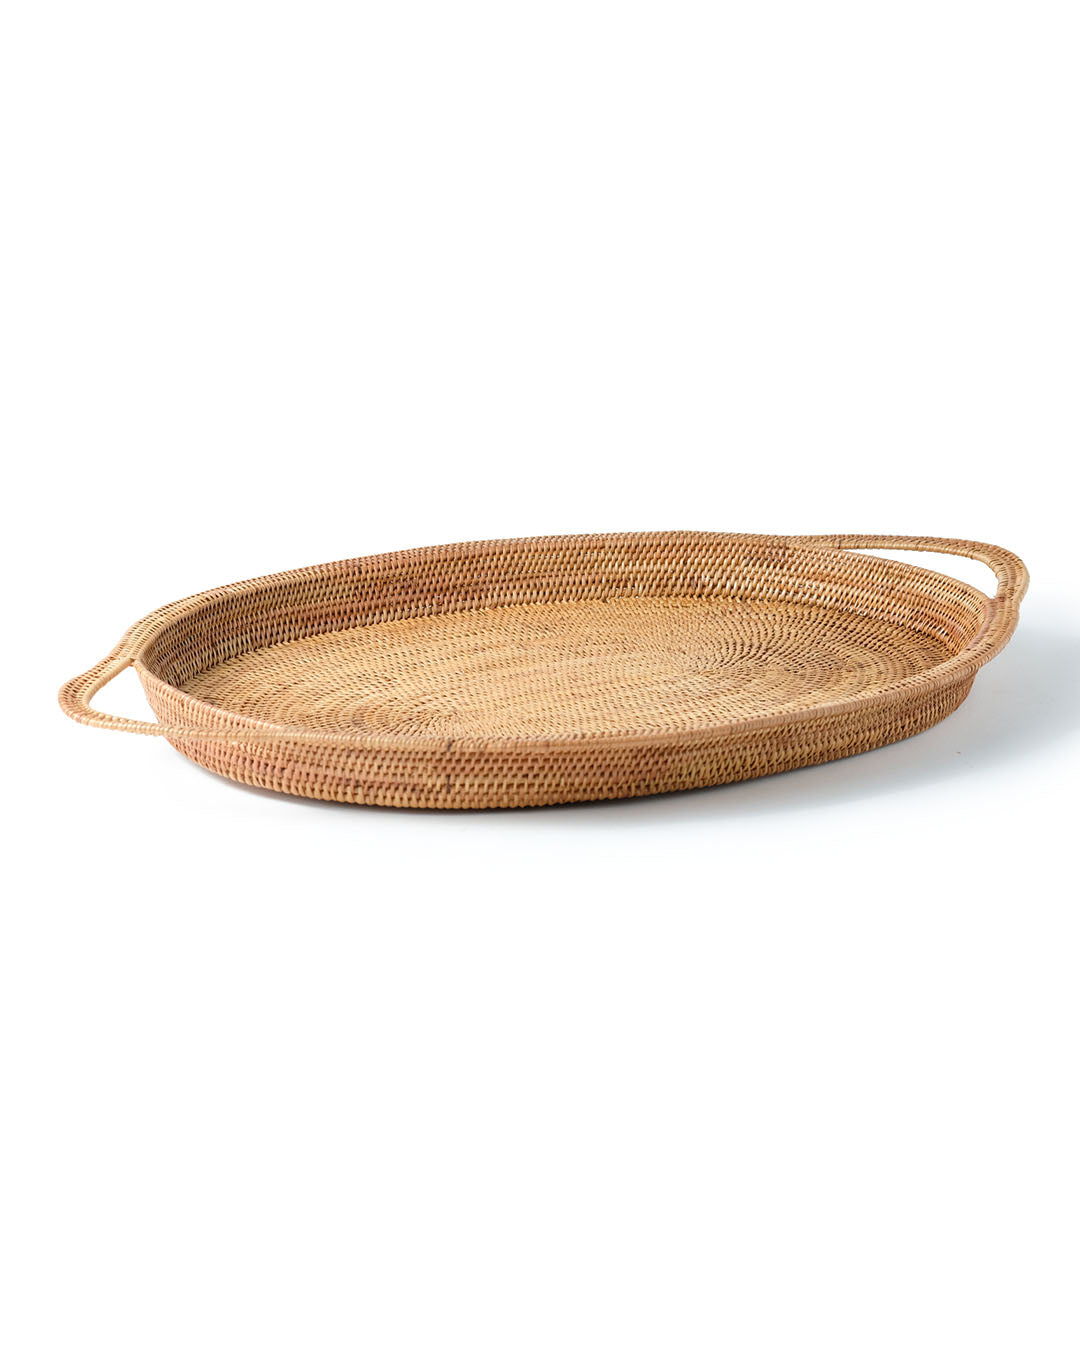 Rattan tray with handles Alor